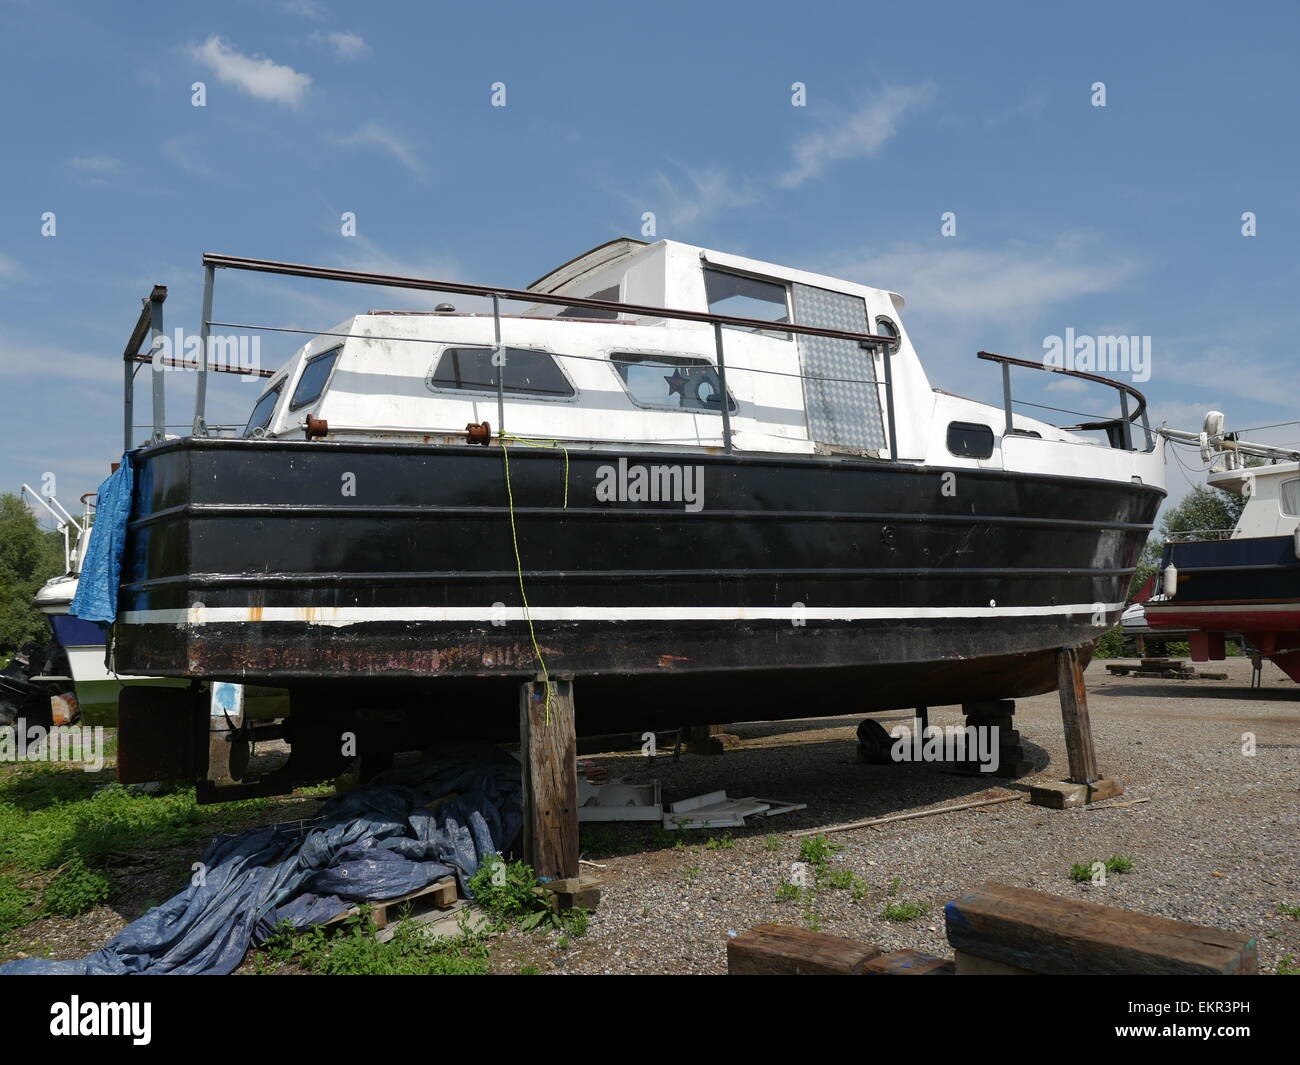 exterior of an old steel hulled boat in process of being stripped down and repaired and refurbished as a project Stock Photo